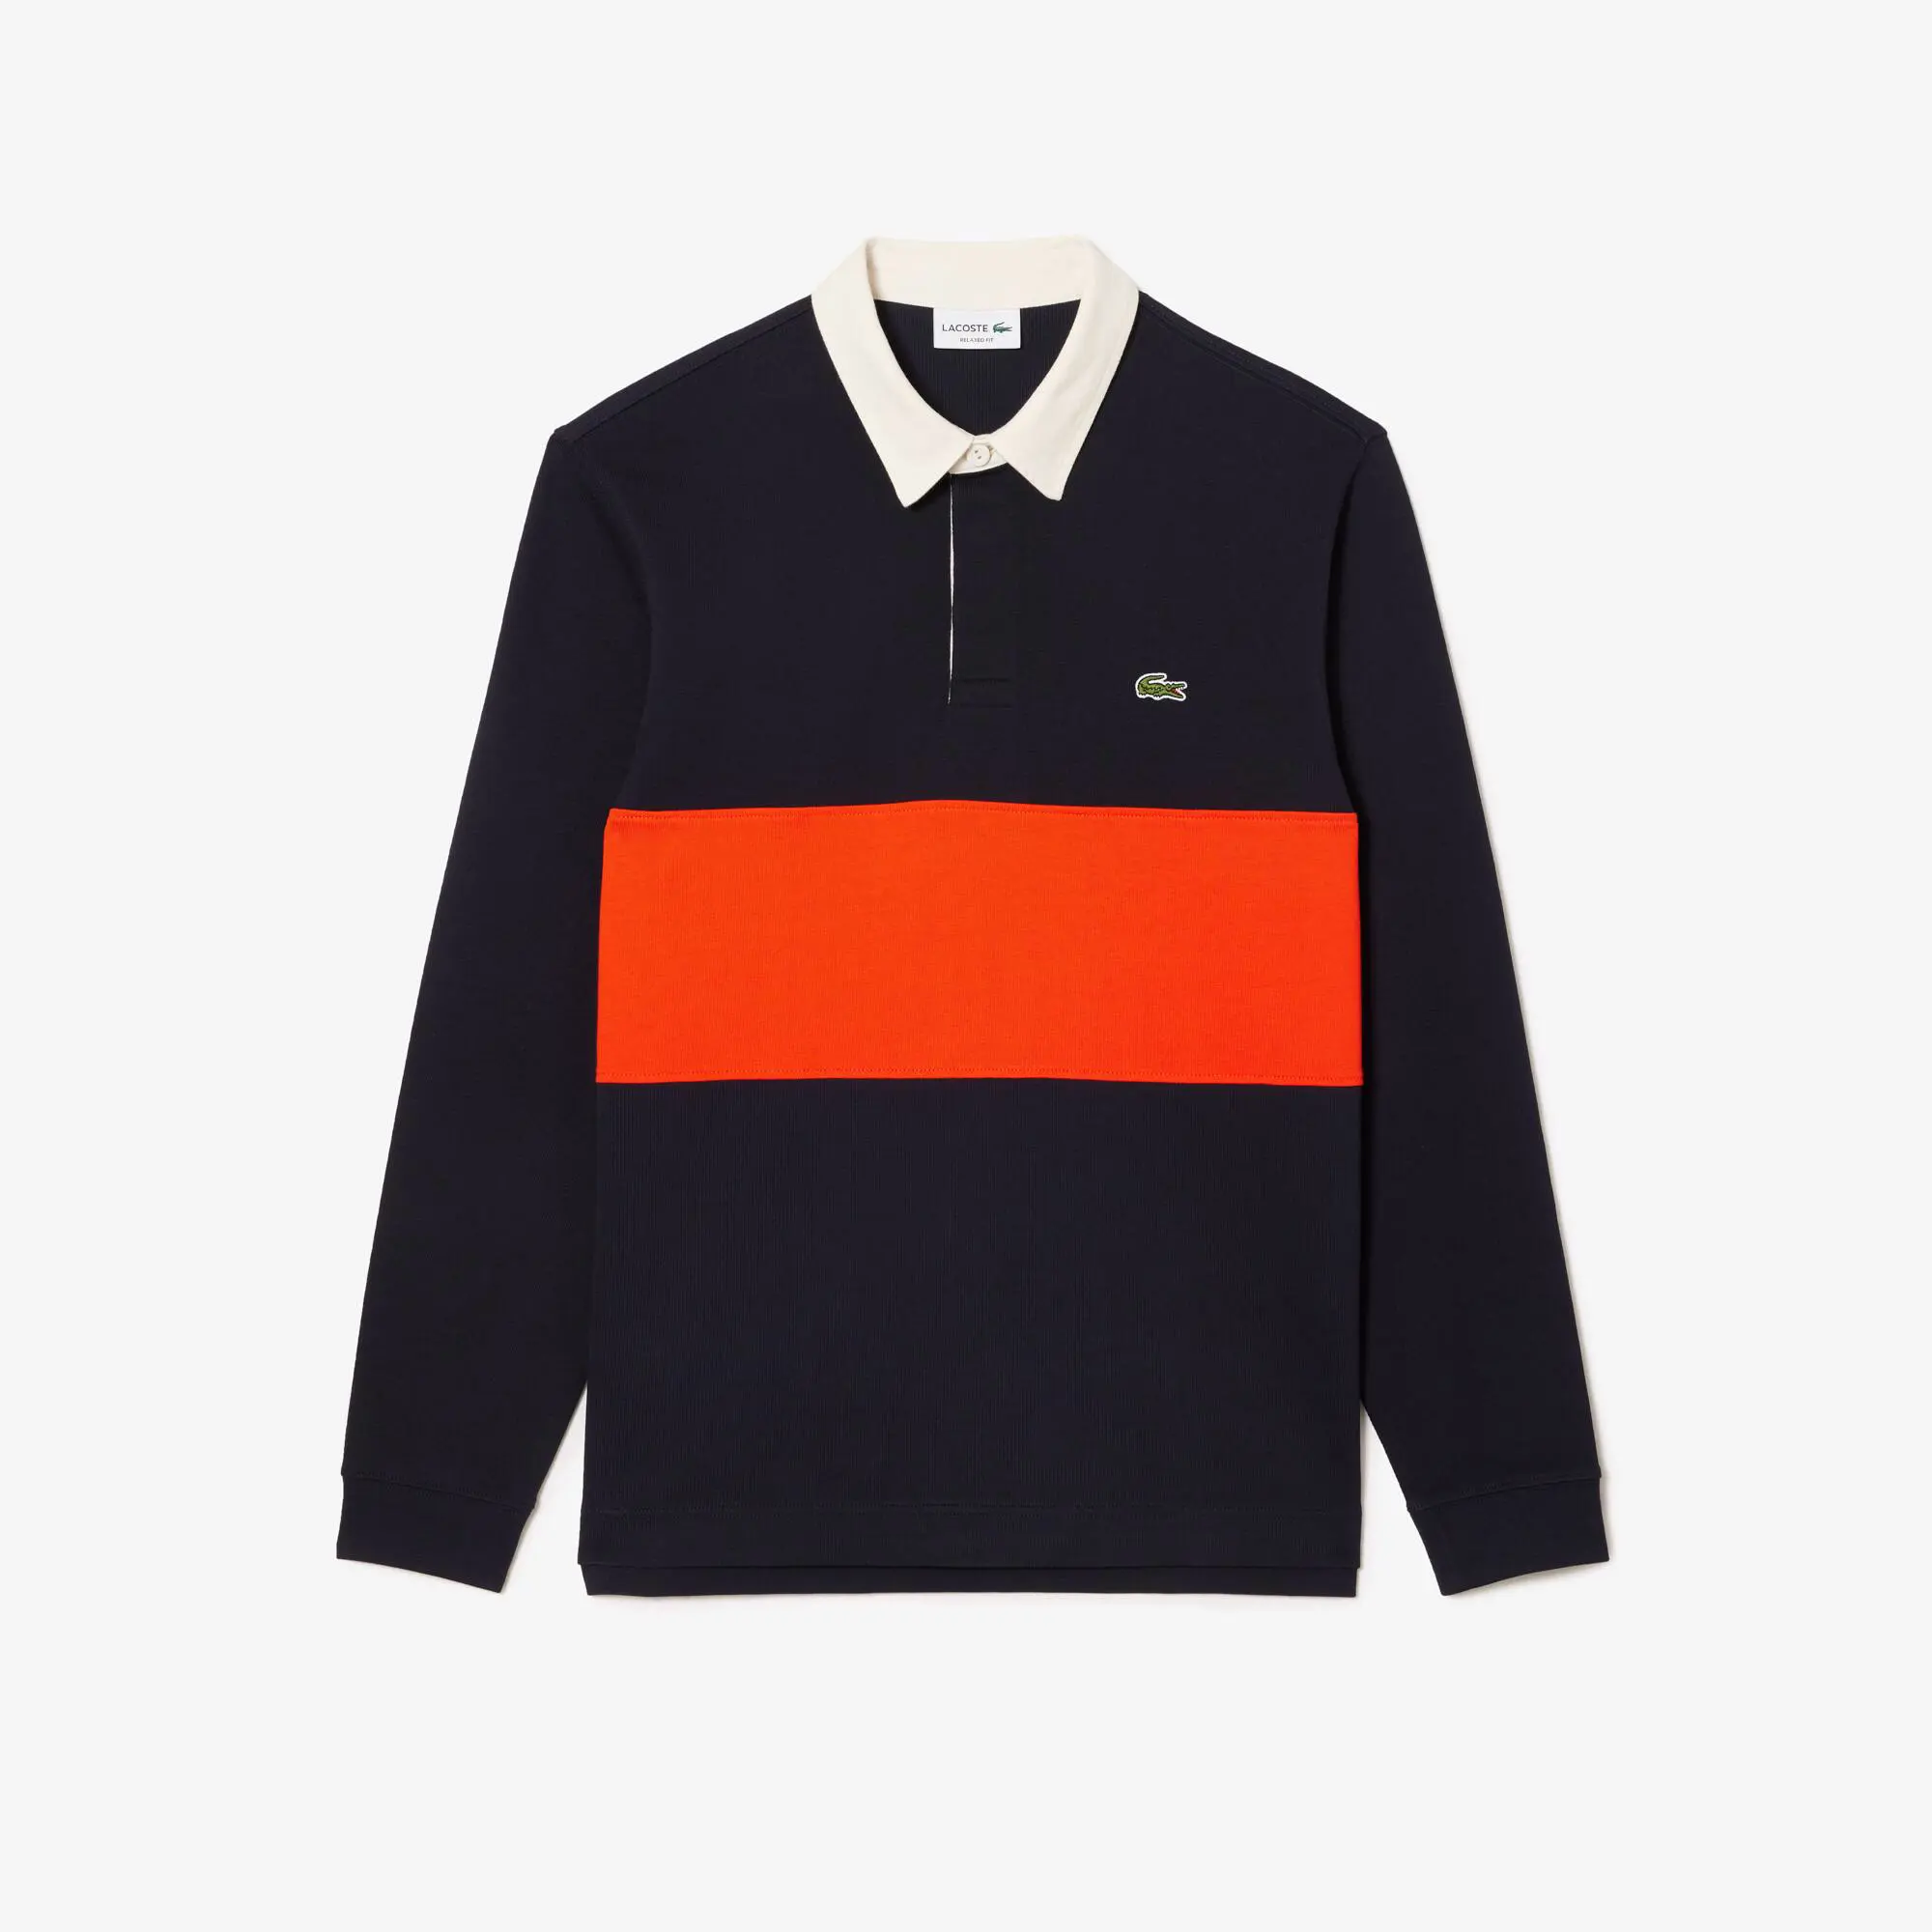 Lacoste Men's Cotton Colorblock Rugby Polo. 2